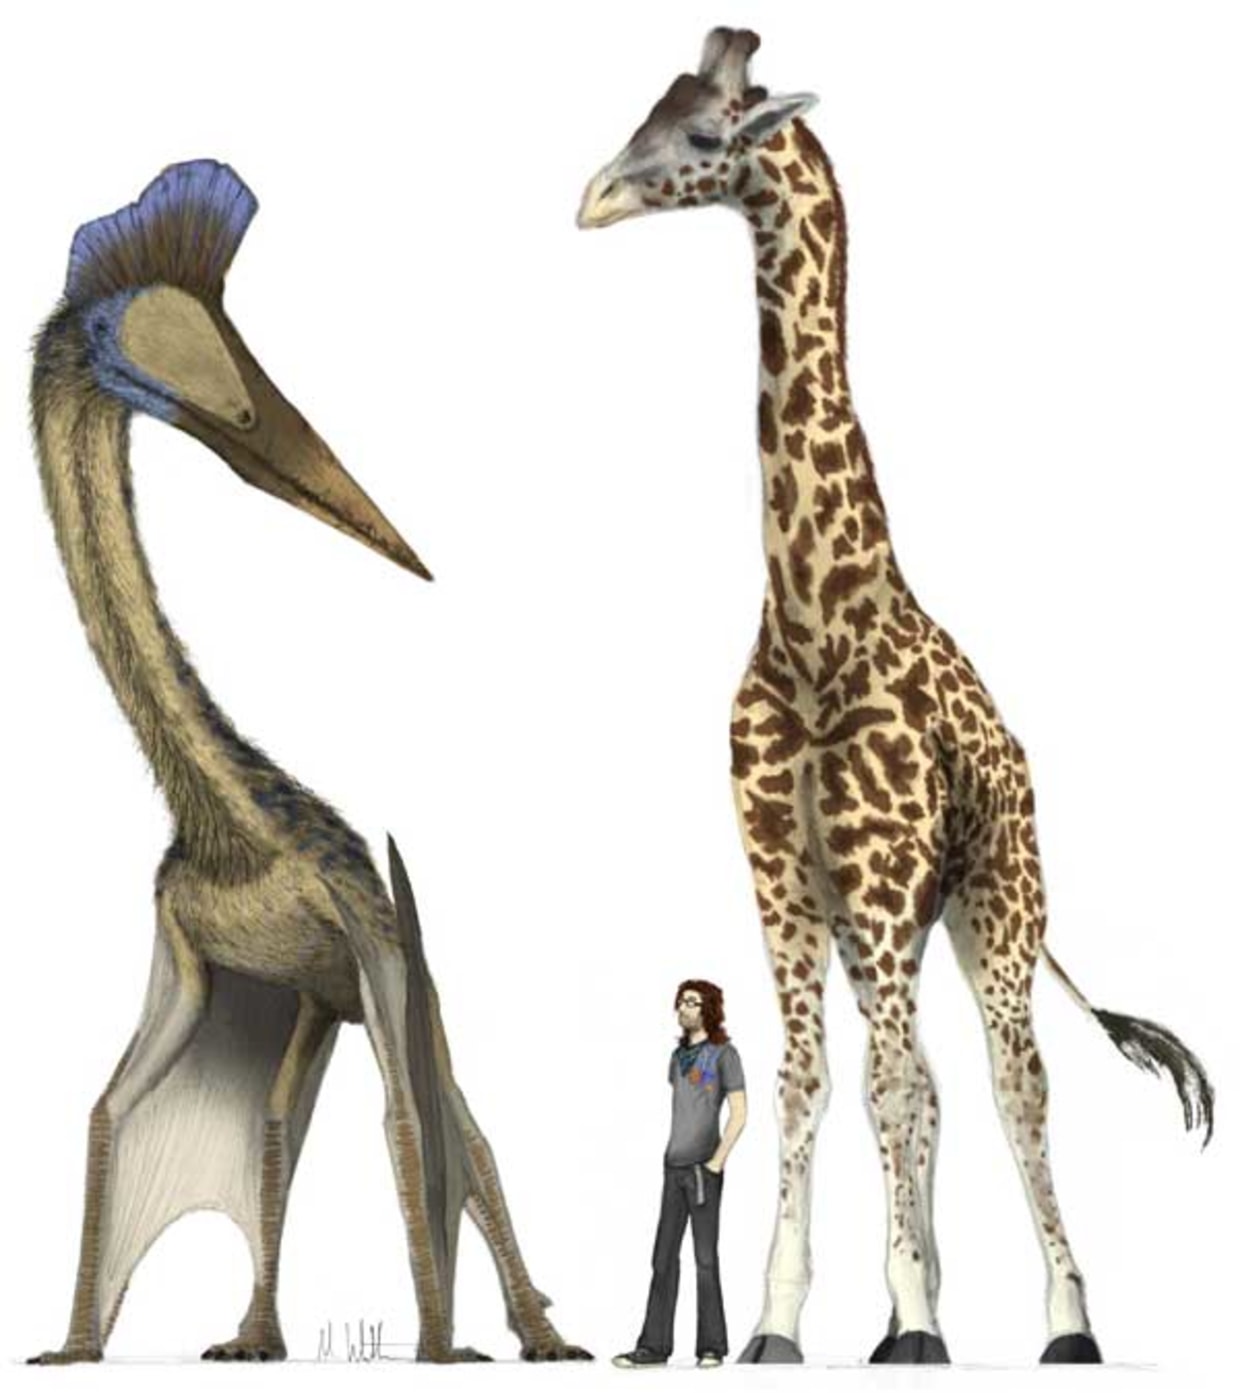 Giraffe-sized flying reptiles once soared over Alberta